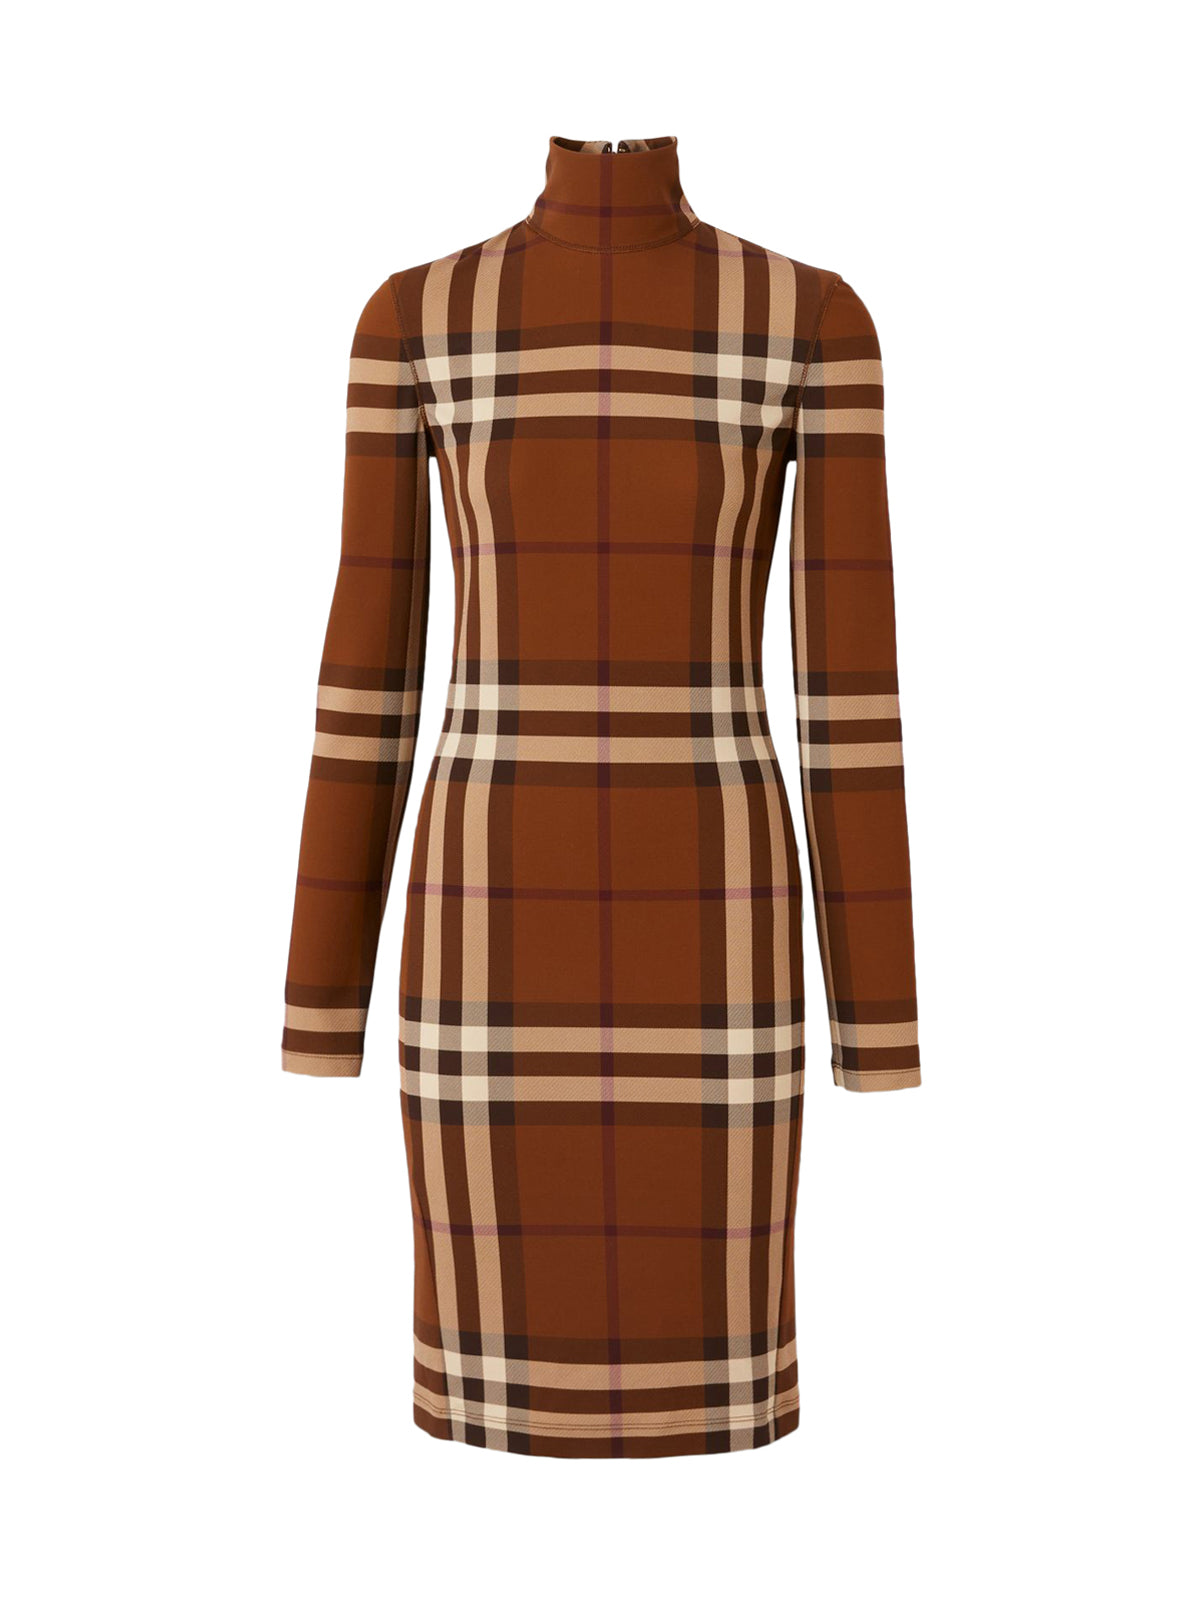 Stretch jersey dress with funnel neck and tartan motif